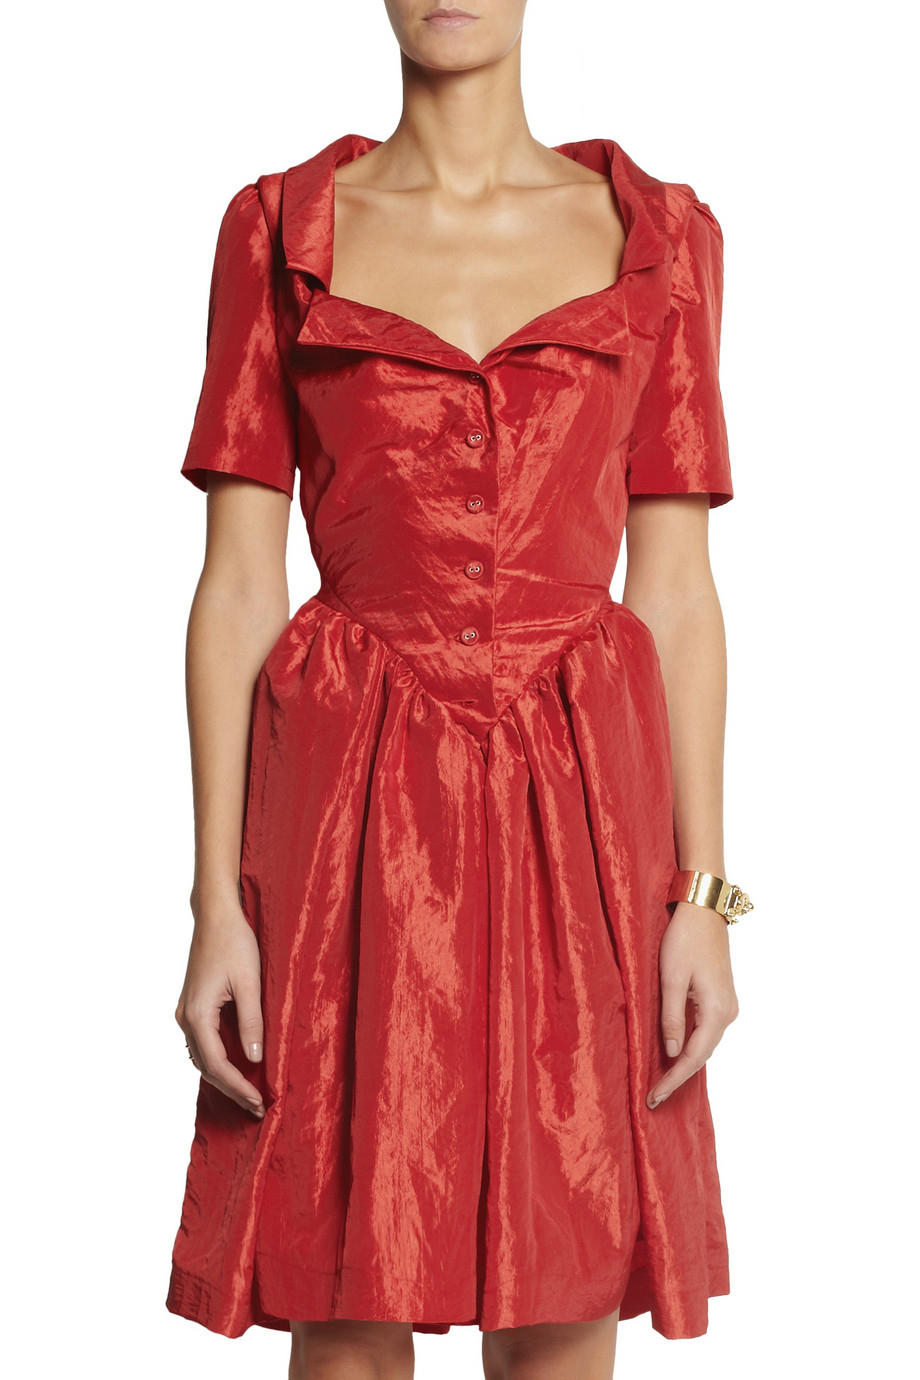 Vivienne Westwood Anglomania Monday Crinkled-Taffeta Dress in Claret ...